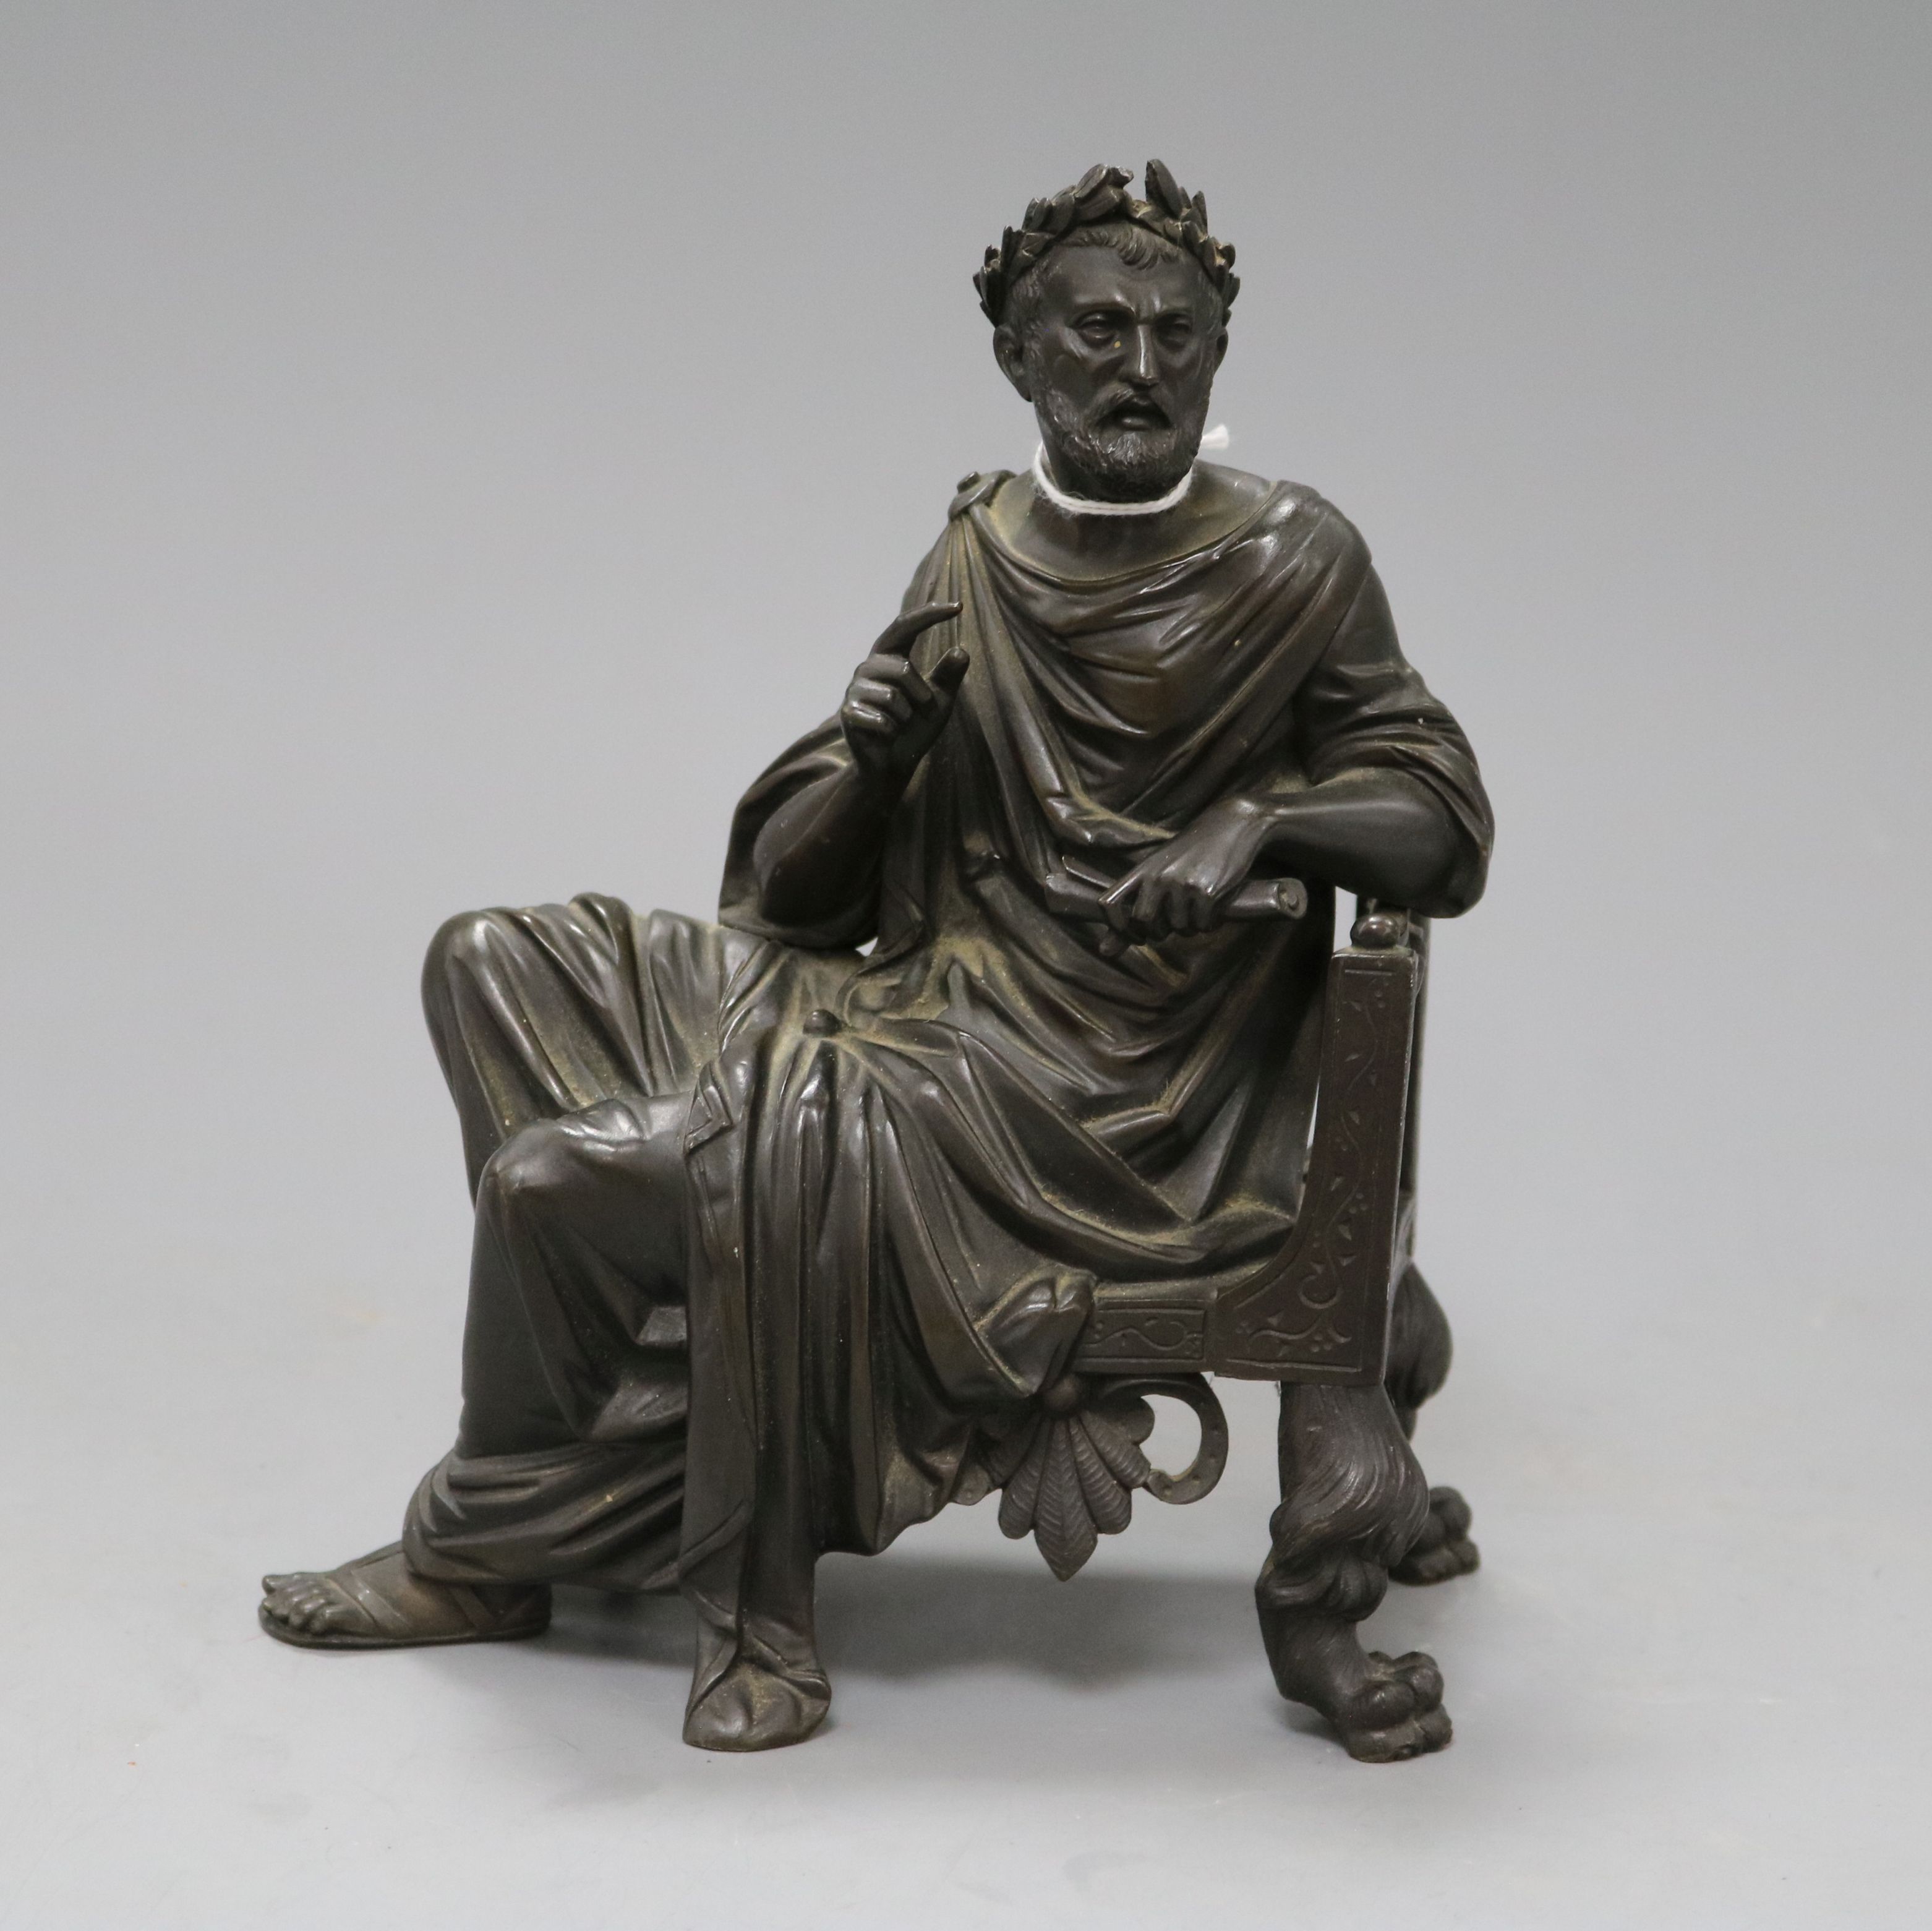 A French 19th century bronze figure of a seated classical scholar, wearing robes and laurel wreath